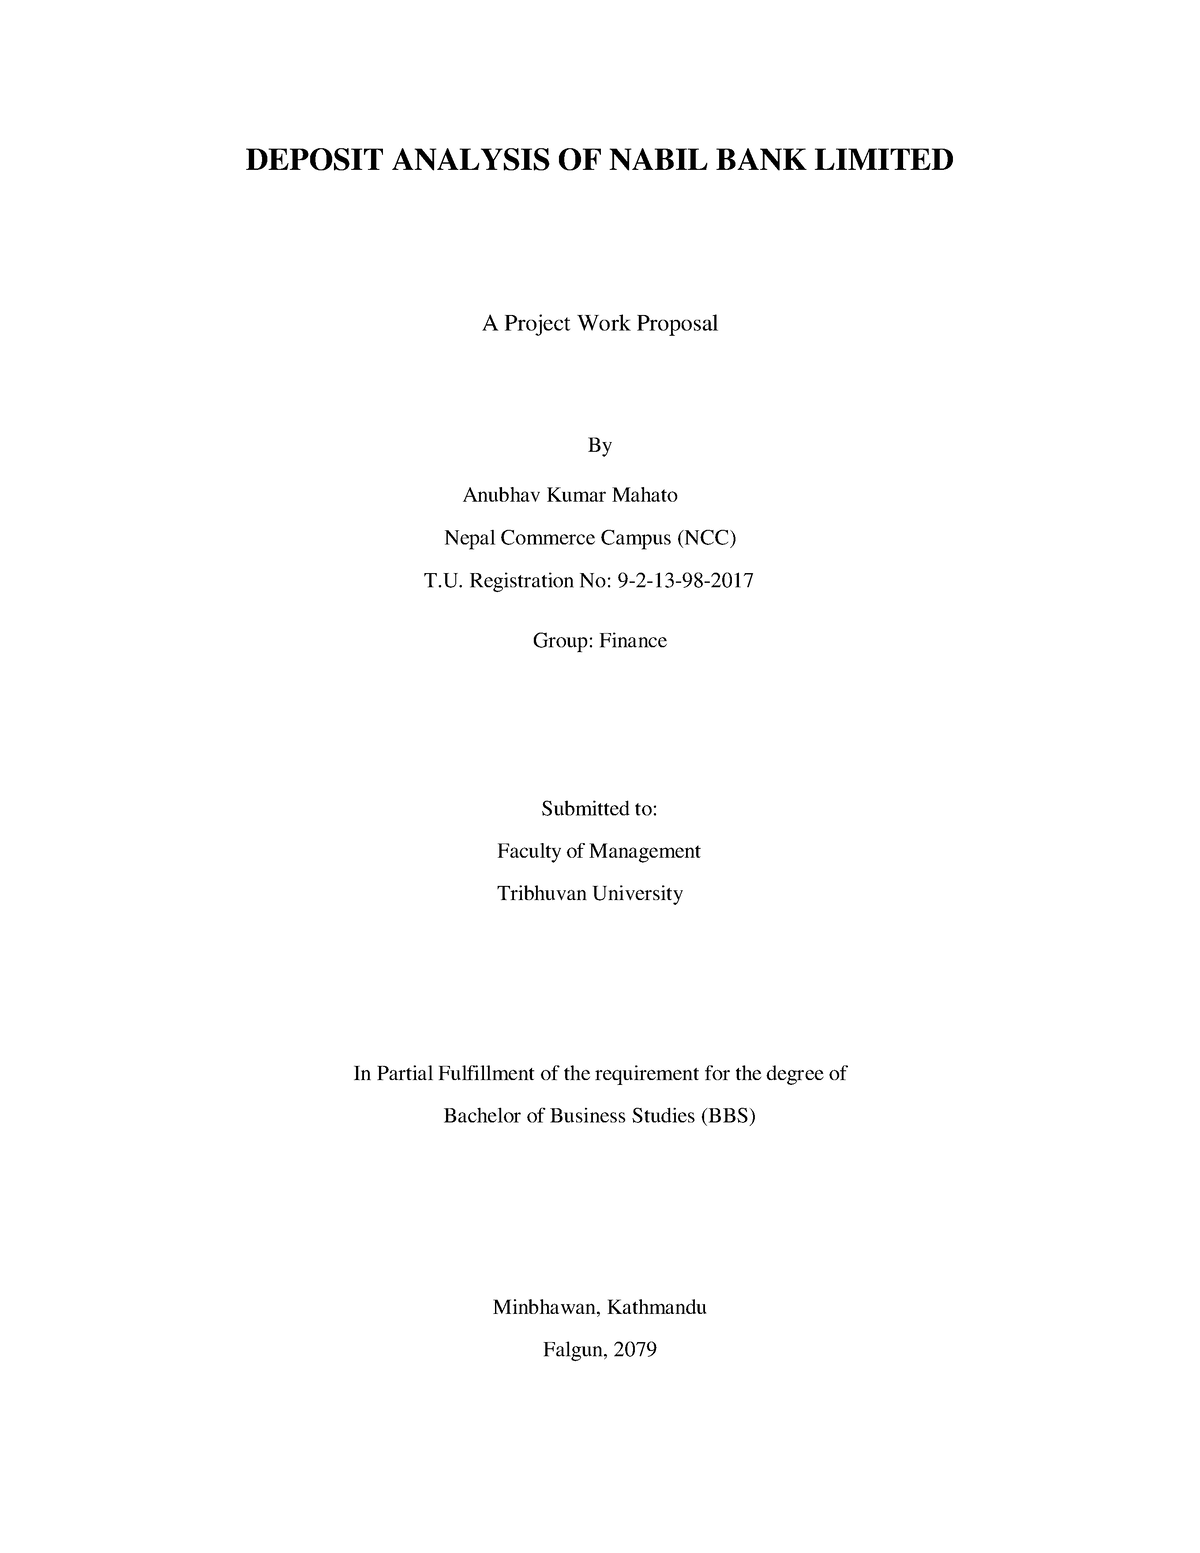 thesis on financial analysis of nabil bank